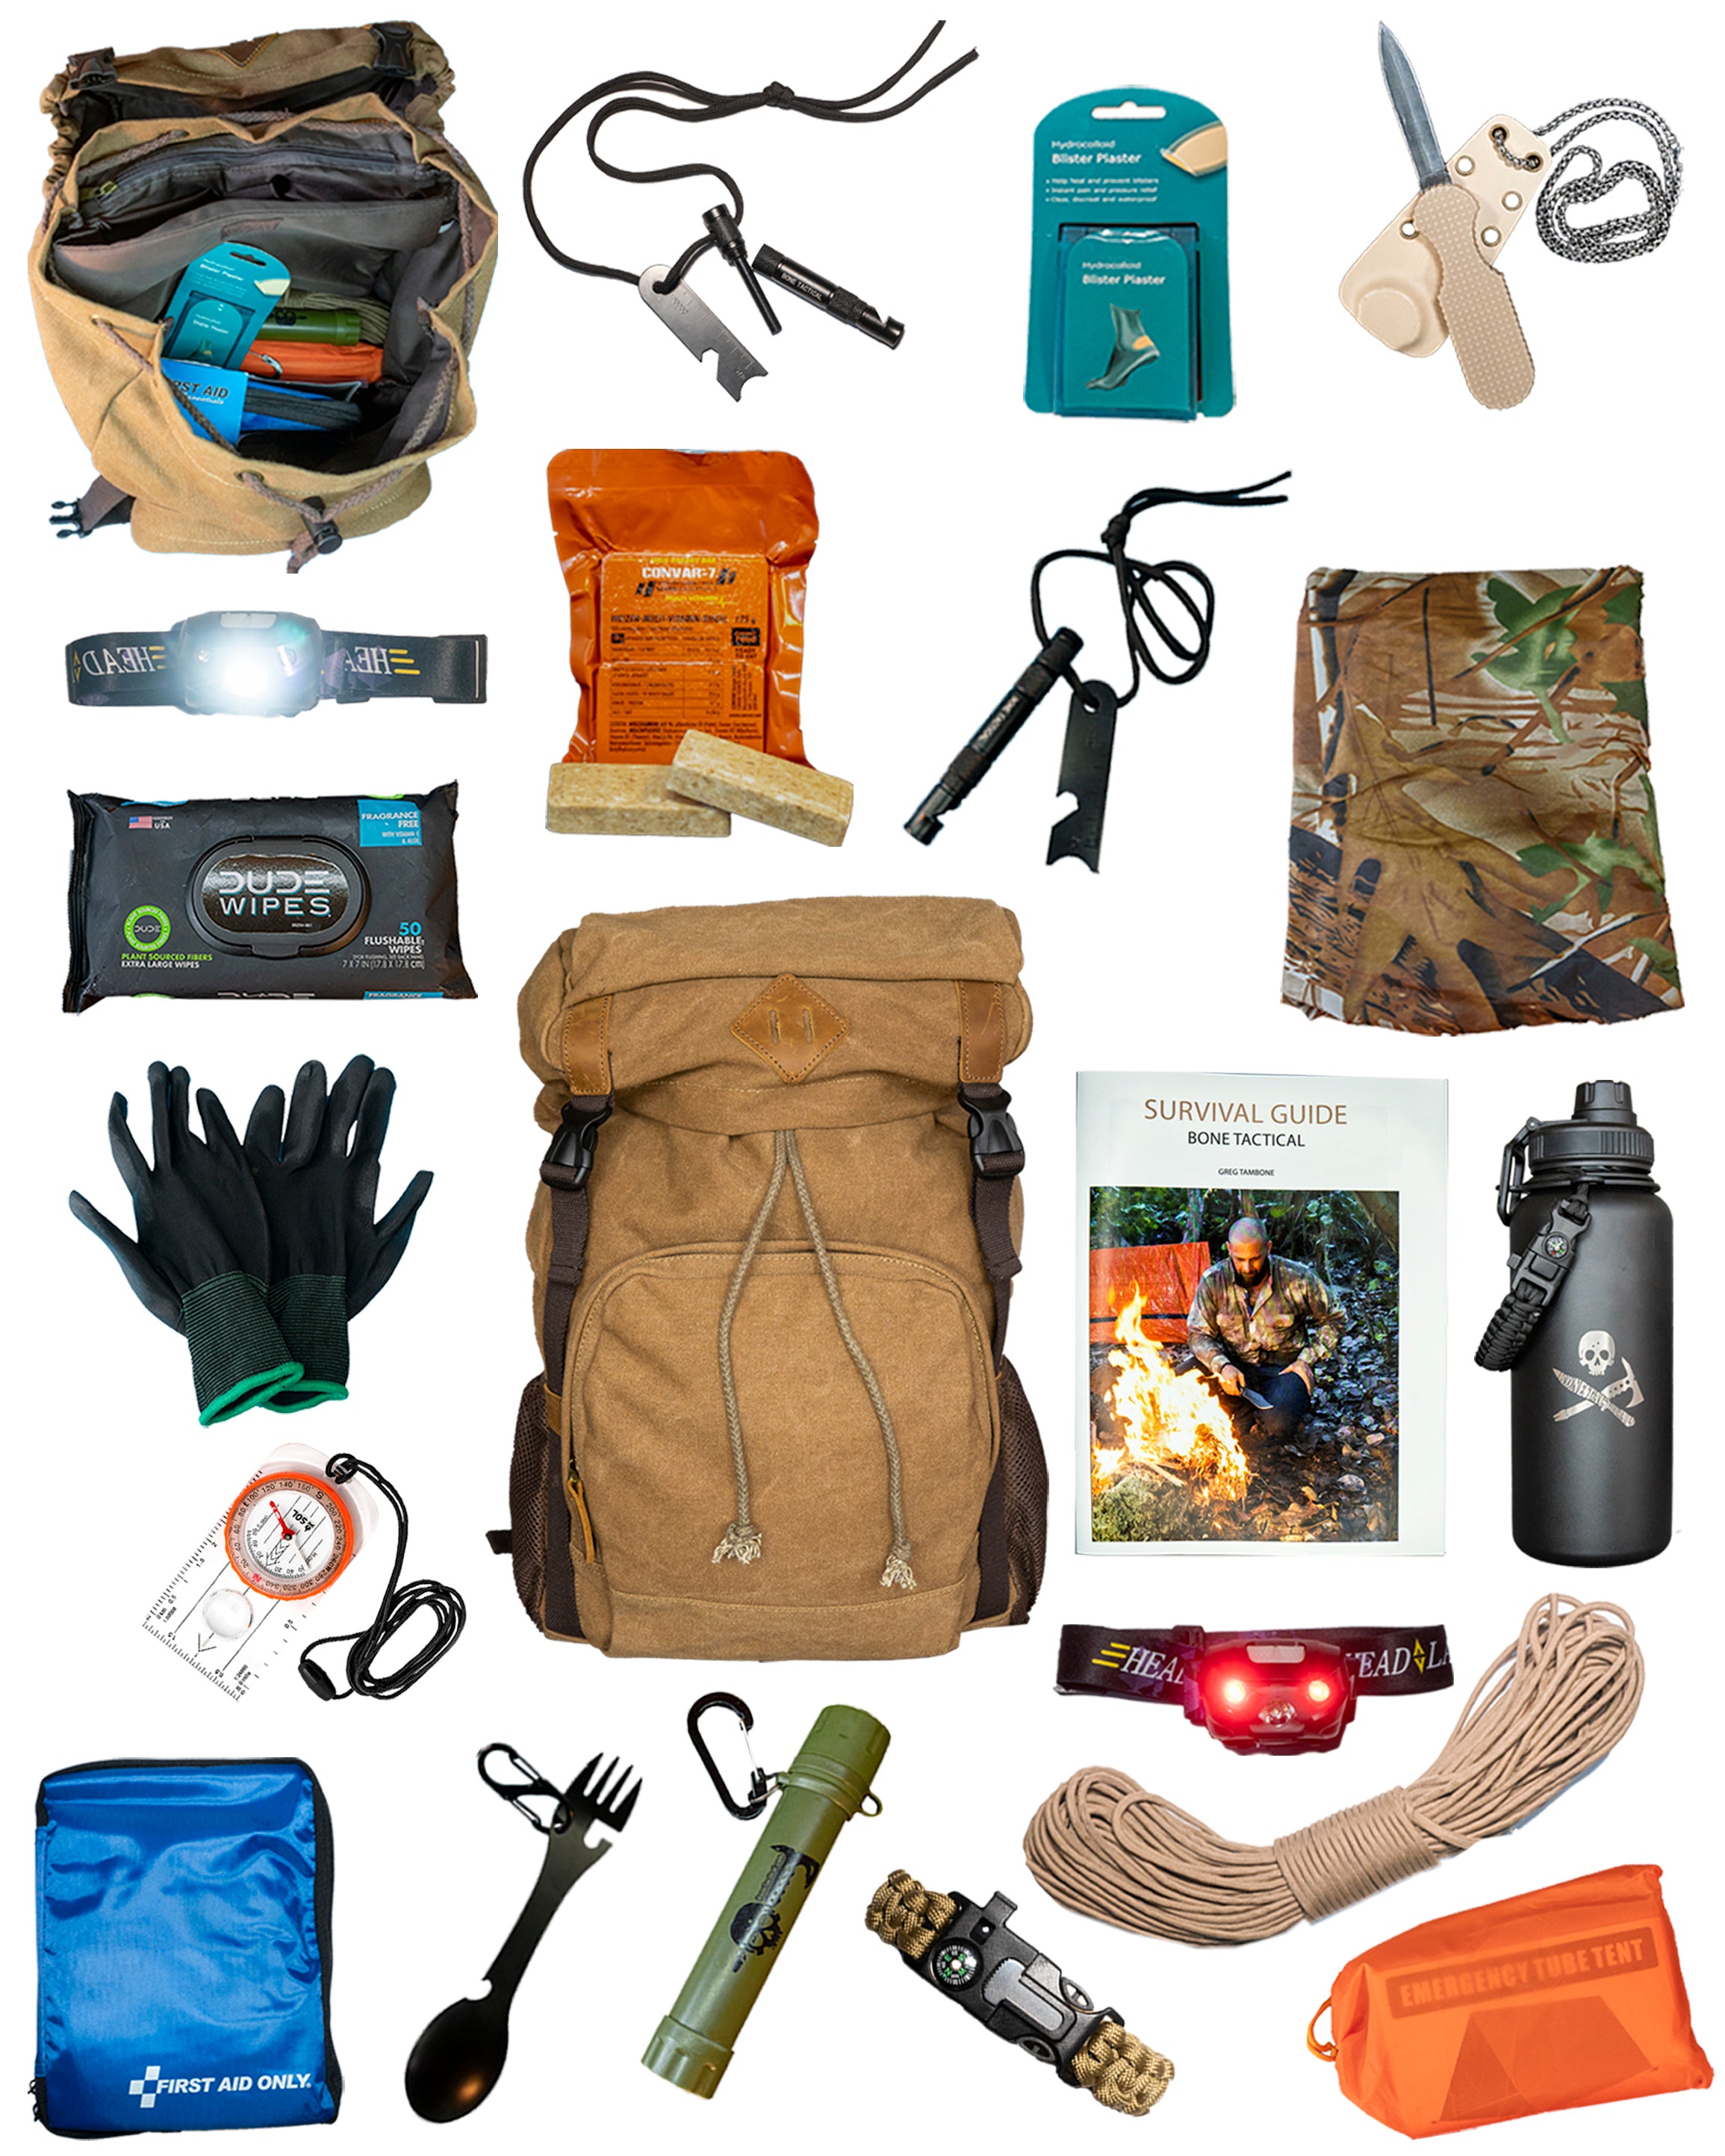 Building the Ultimate Survival Kit, Part 5 (Cordage)